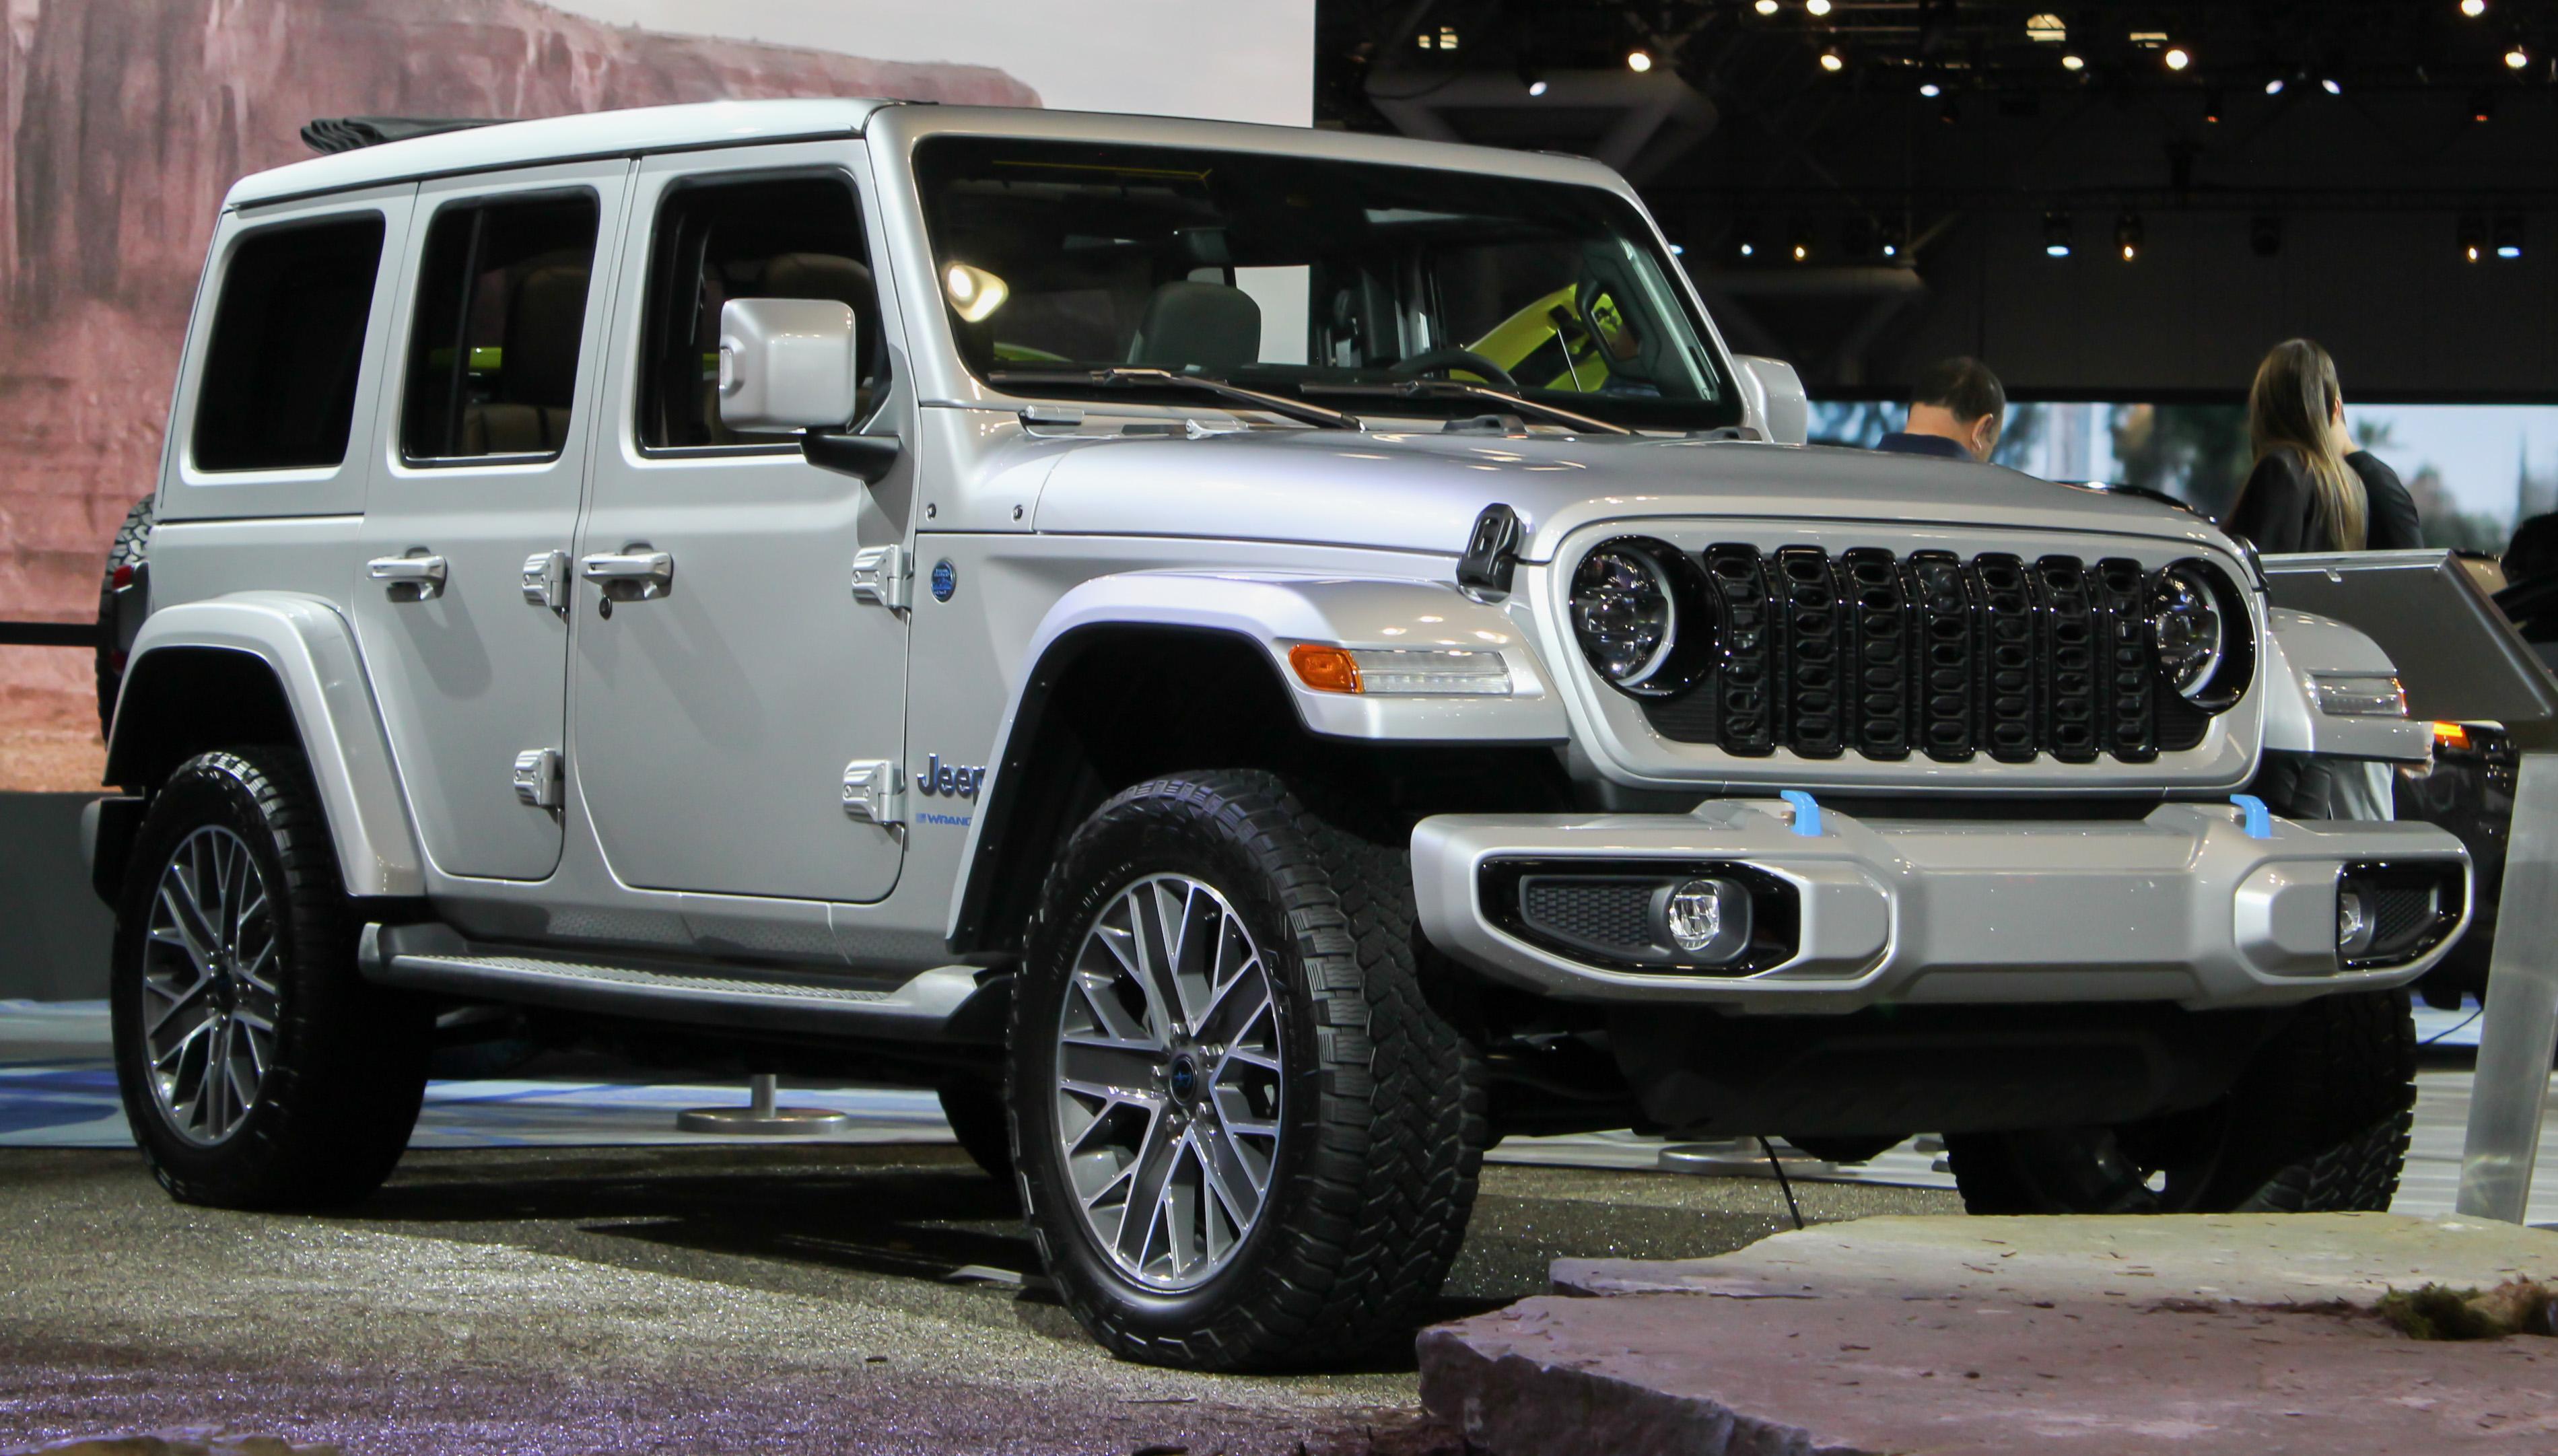 - Recommendations for Consumers Considering a Jeep Purchase